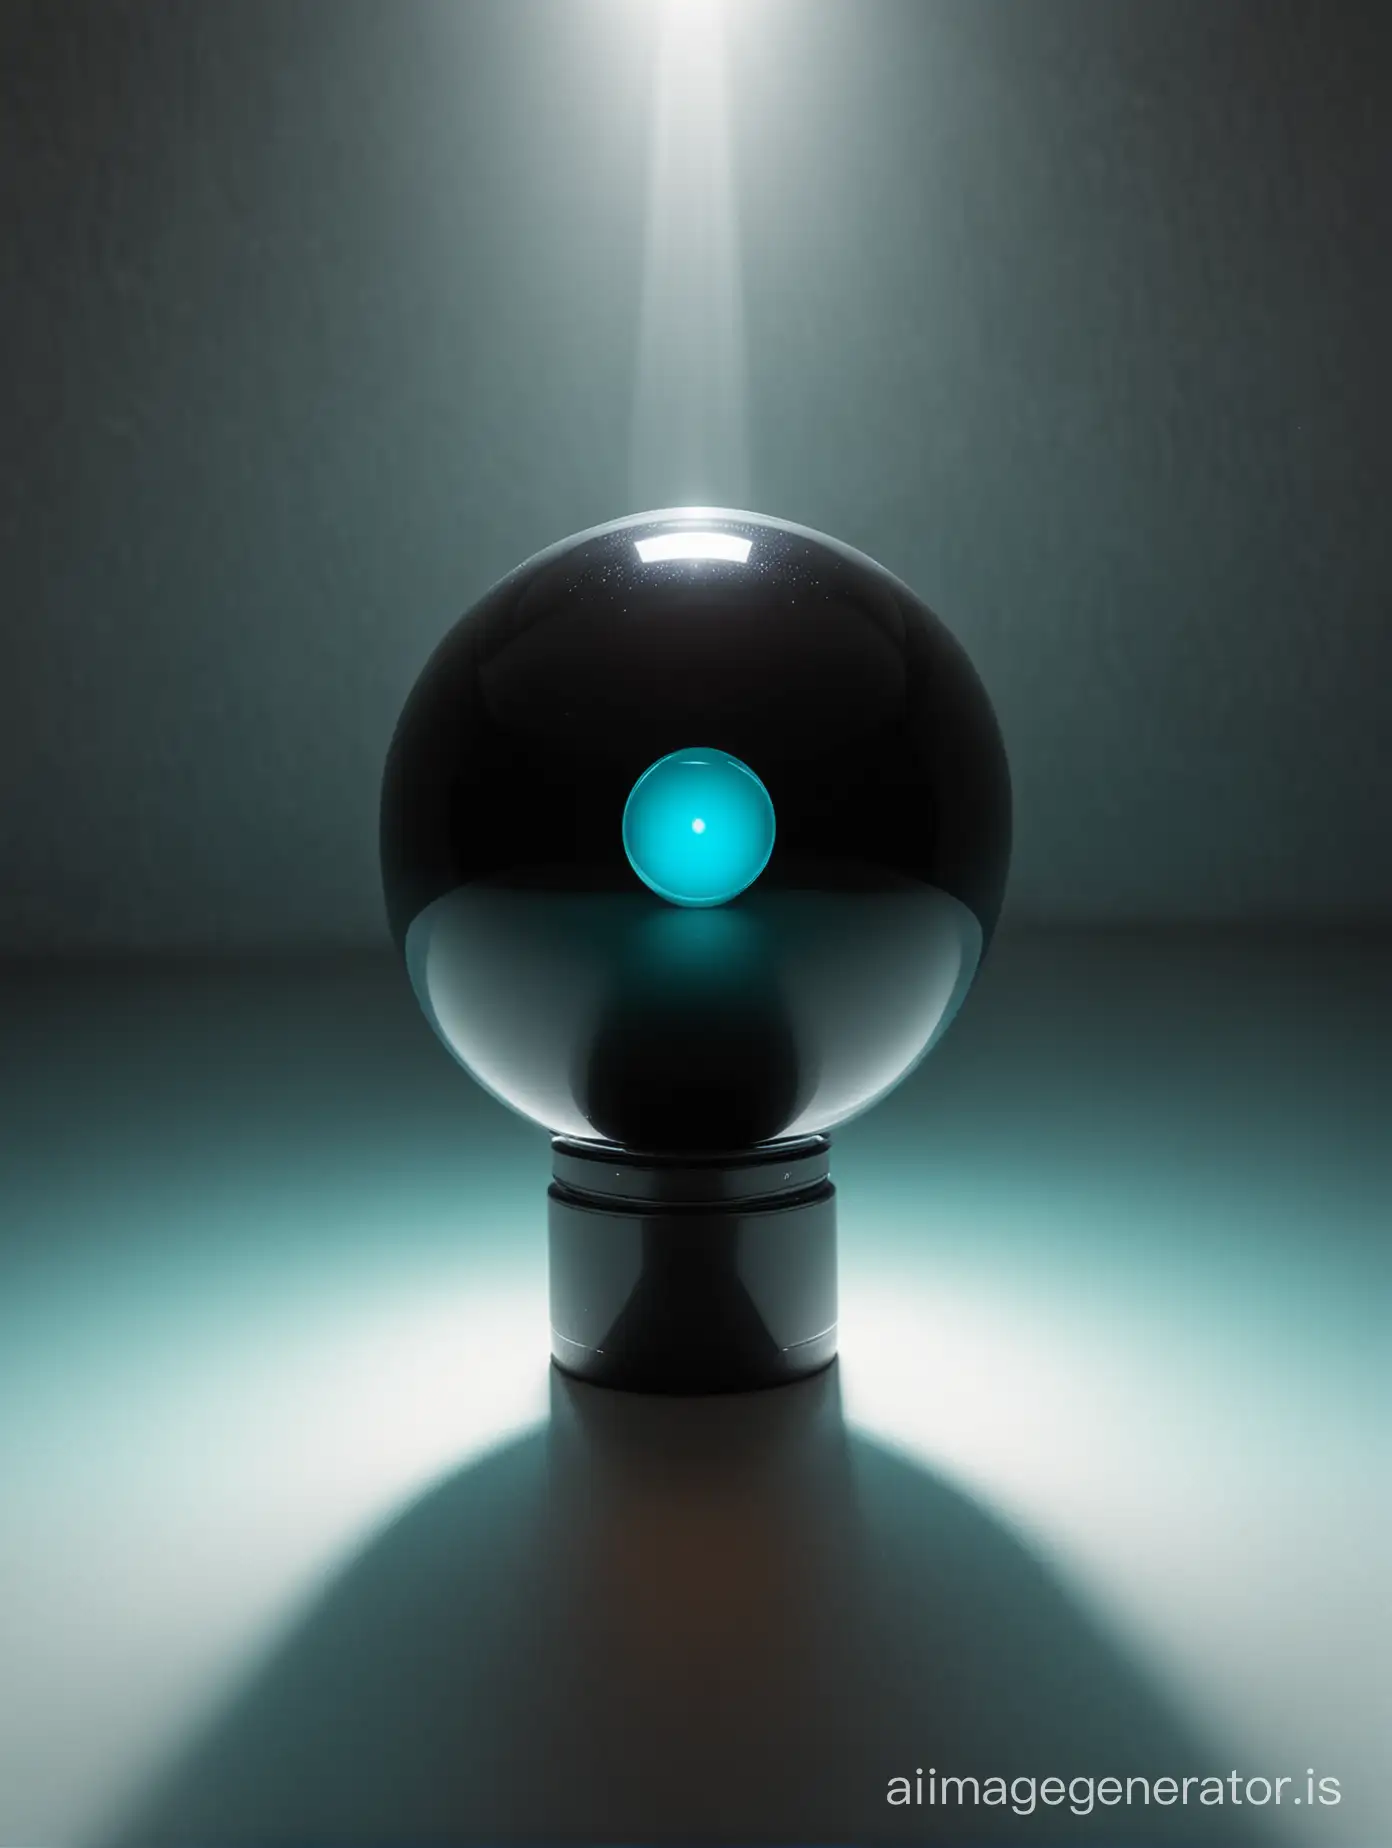 A black ball has a turquoise spot and surrounded by light